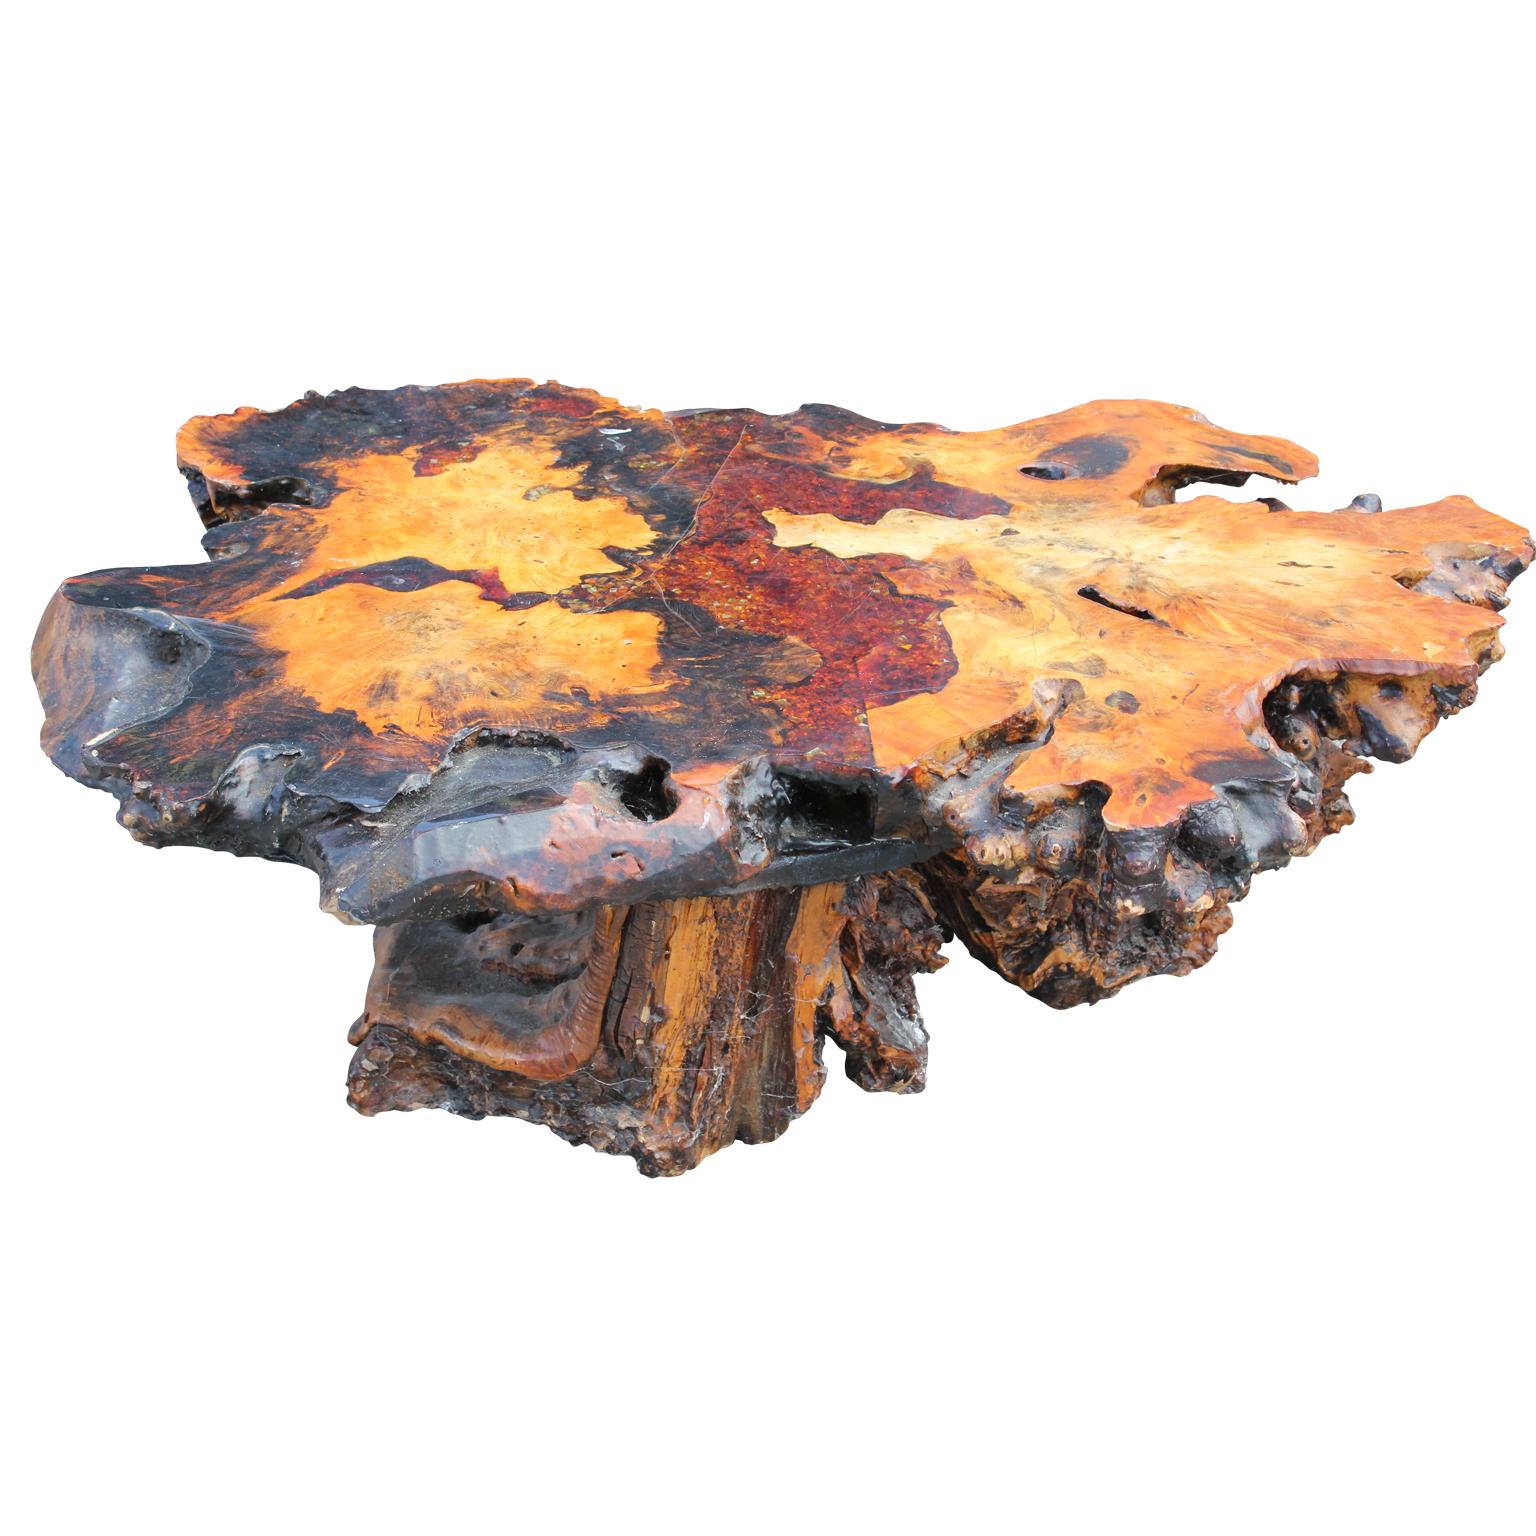 Modern burl root coffee table with amber colored tumbled glass inlayed that cascades through the center, giving it an extra dimension and pop and sealed with a urethane / resin coat. Truly marvelous. In the style of Nakashima.